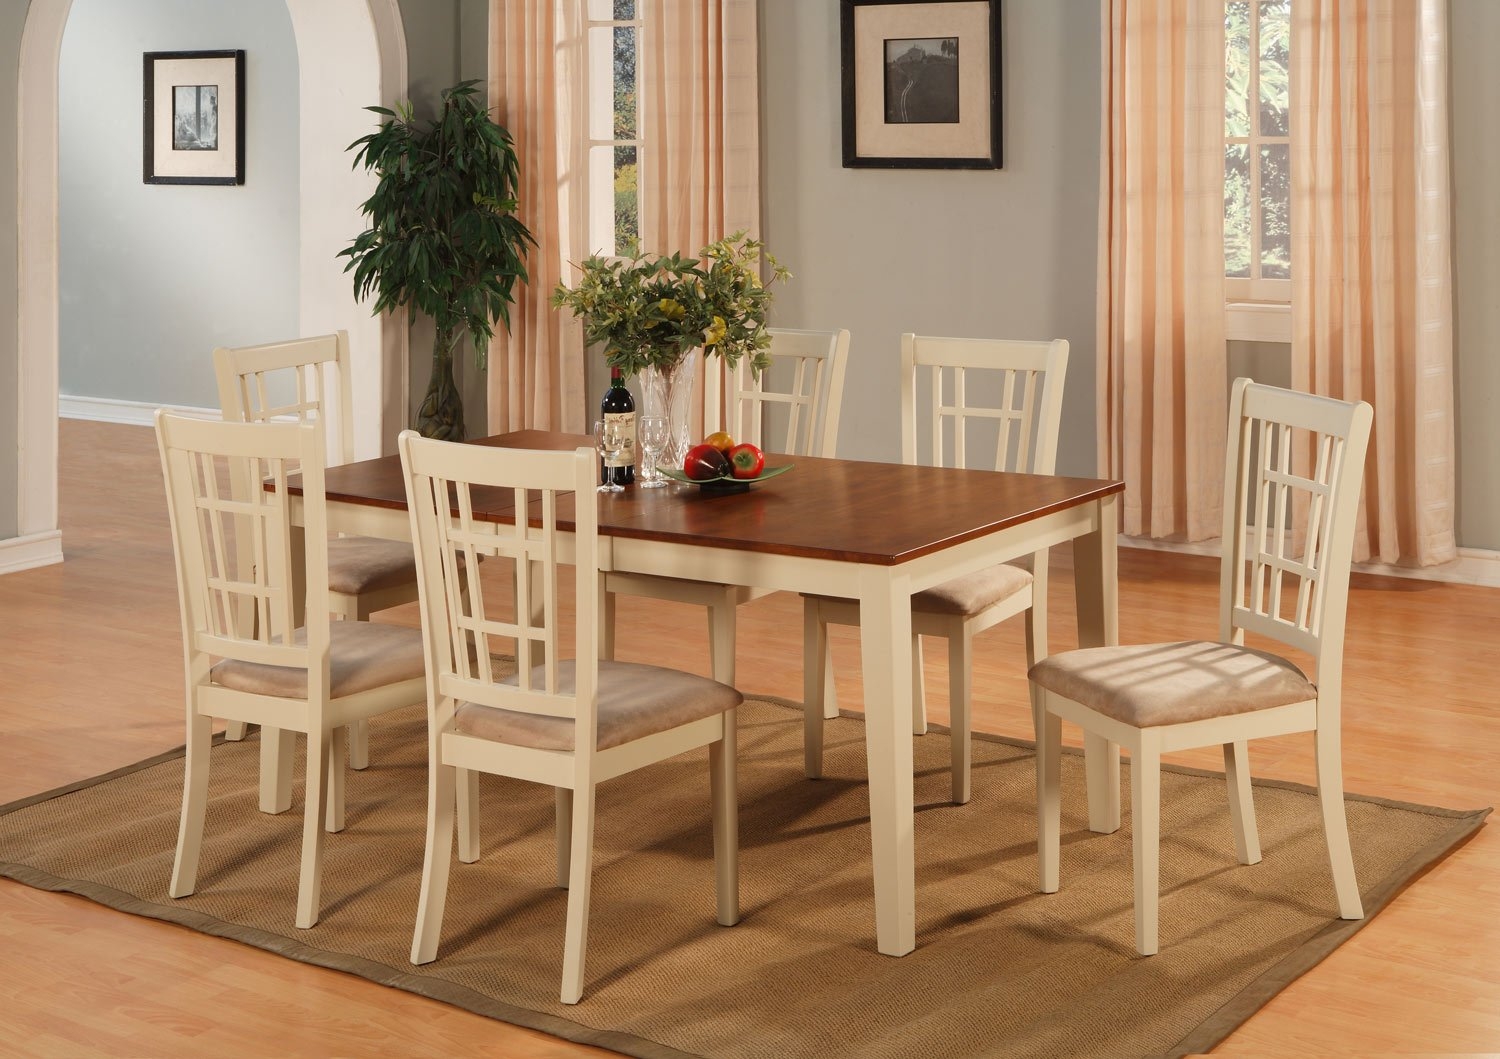 Dinette kitchen dining room set table with 4 upholstery chairs